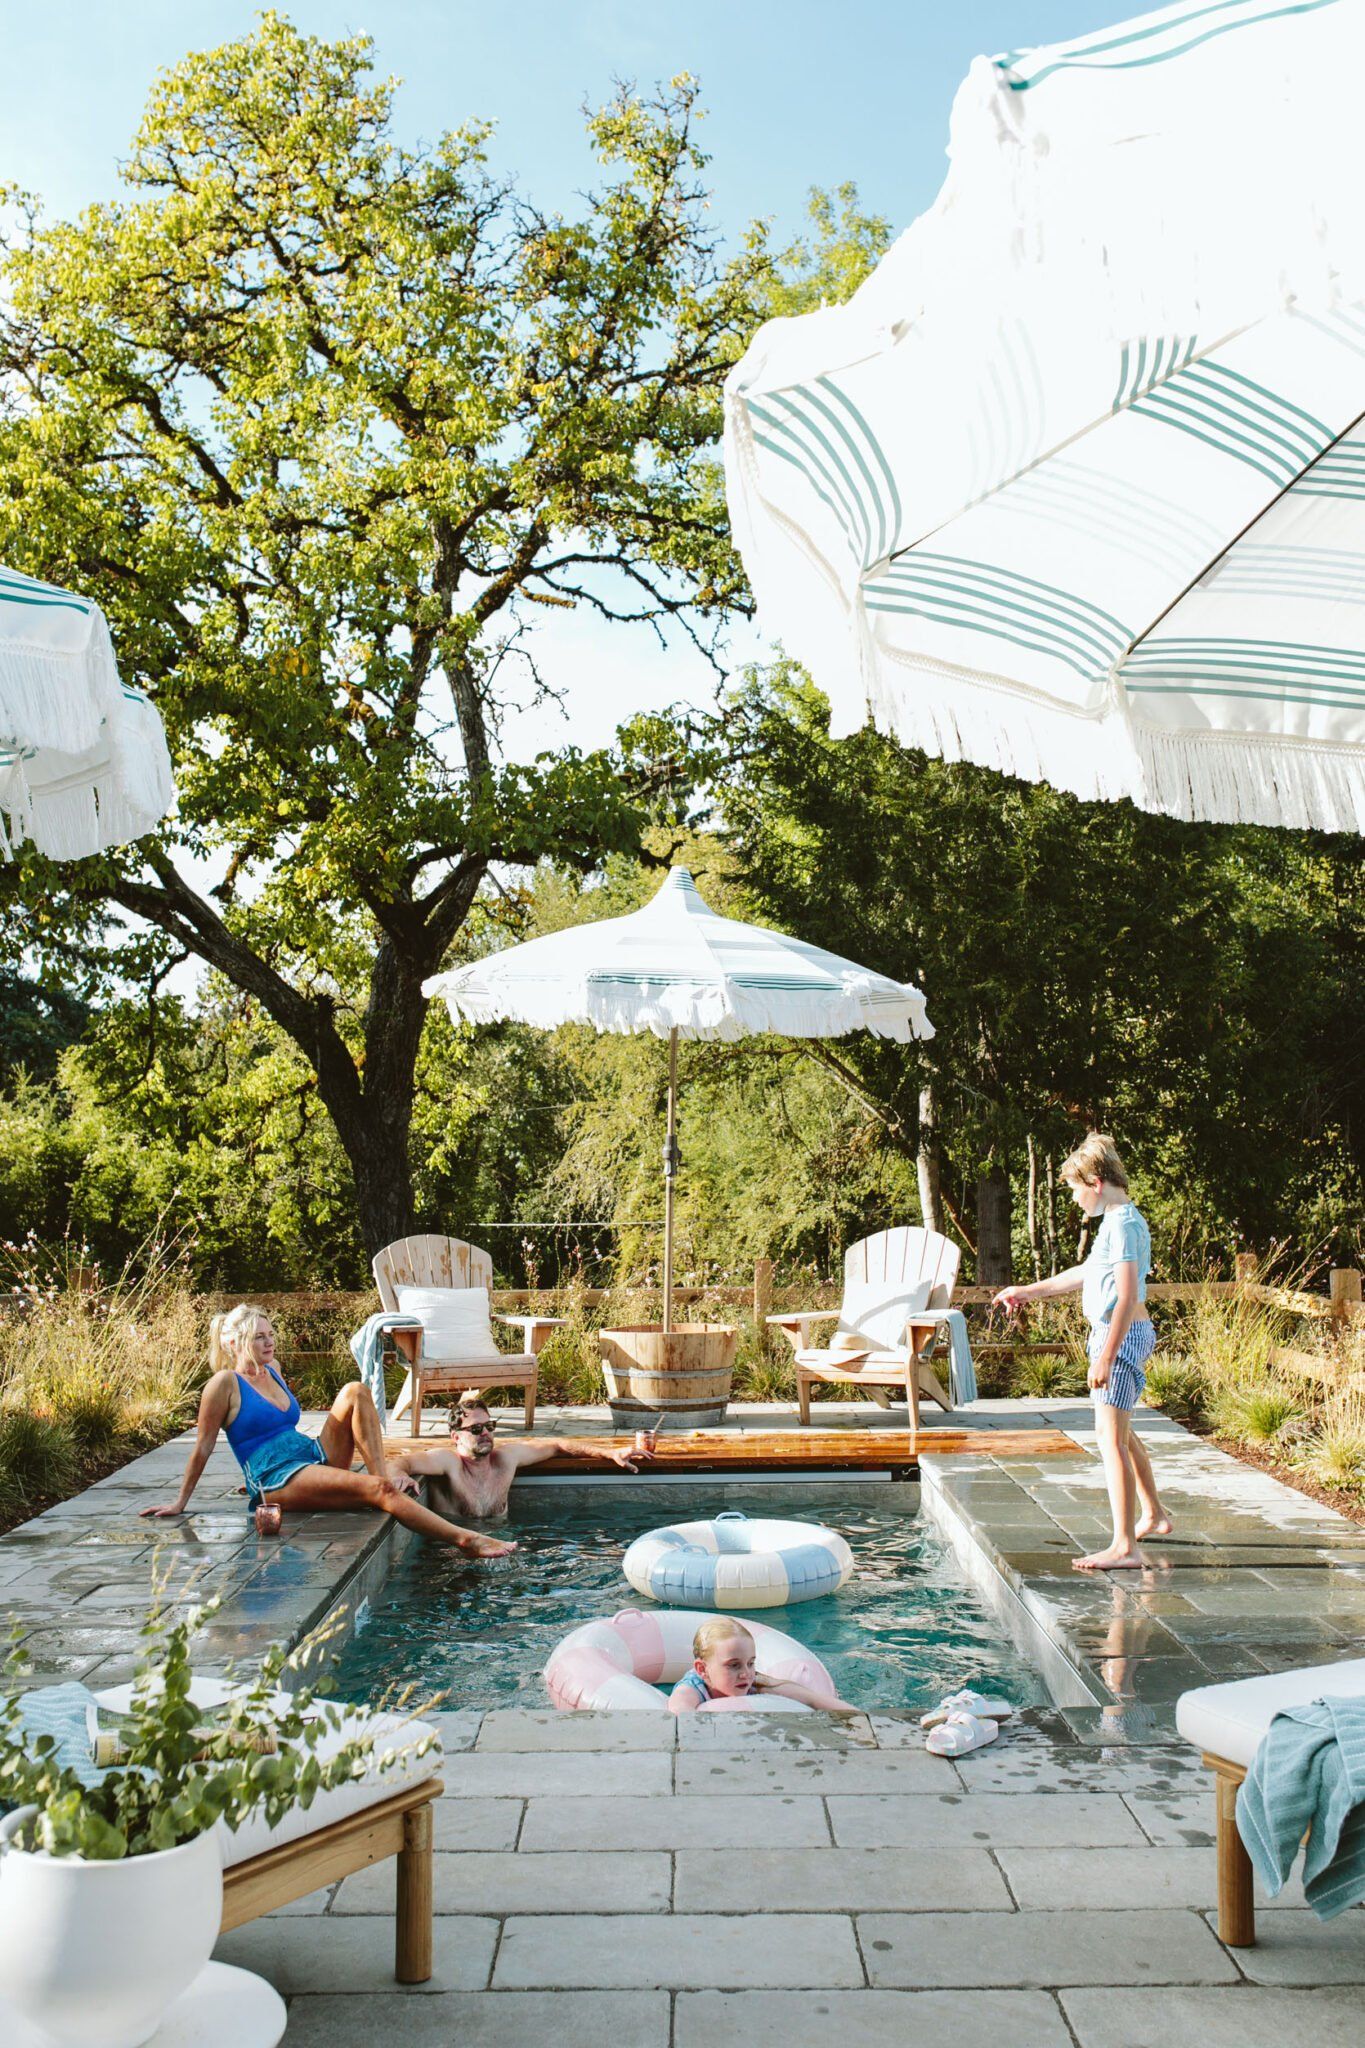 Creating a Relaxing Oasis: Pools Designed for Compact Outdoor Spaces